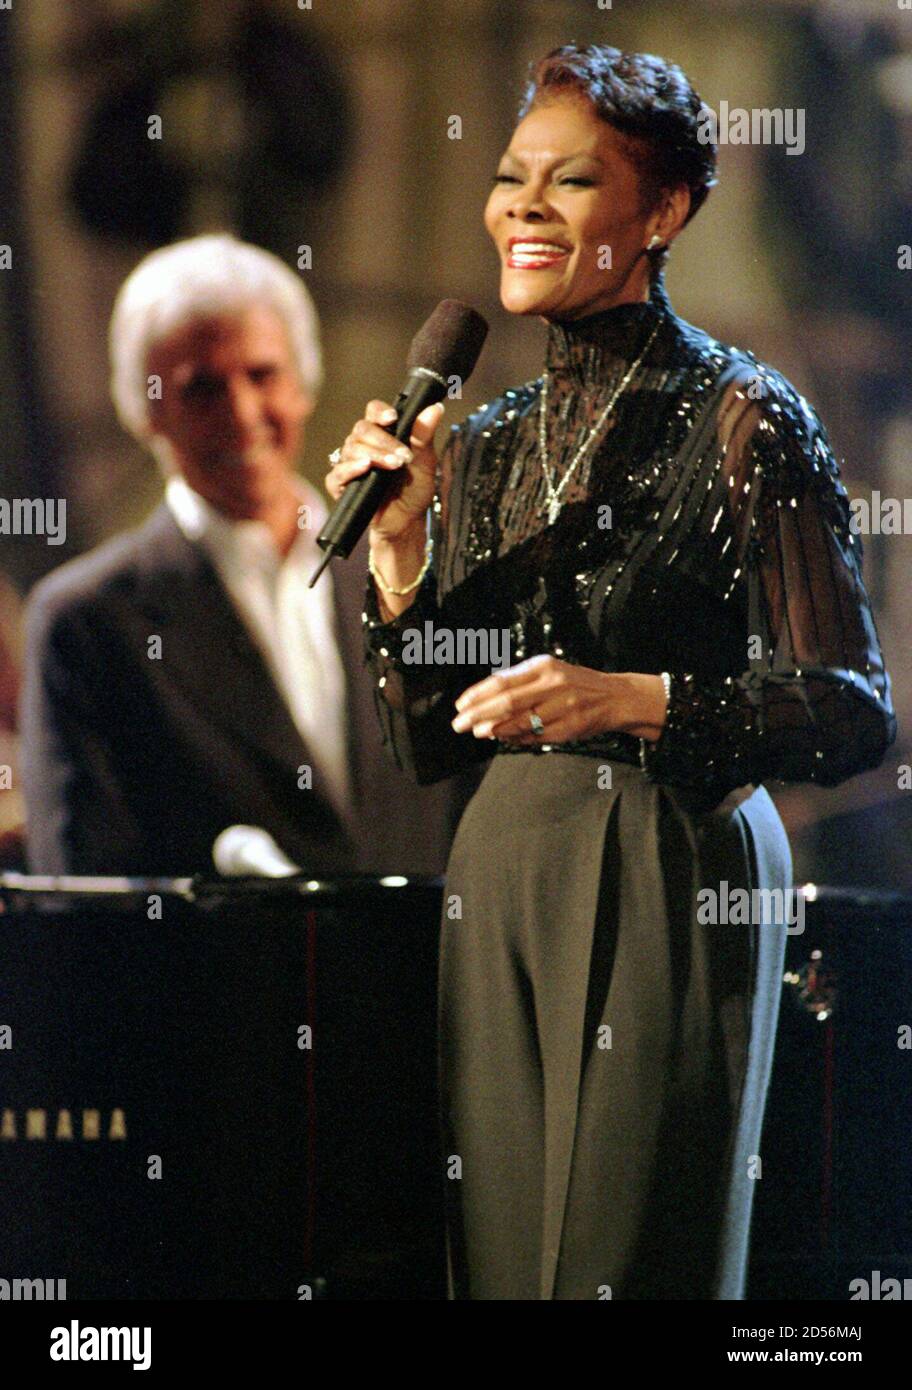 Dionne Warwick (R) sings a Burt Bacharach song while Burt (L) plays the piano during the taping of a Turner Network Television special 'Burt Bacharach: One Amazing Night' in New York on April 8. [The special brought out numerous musical celebraties to sing Bacharach tunes, including Elvis Costello, Sheryl Crow, Chrissie Hynde and Luther Vandross. The show will air April 15.] Stock Photo